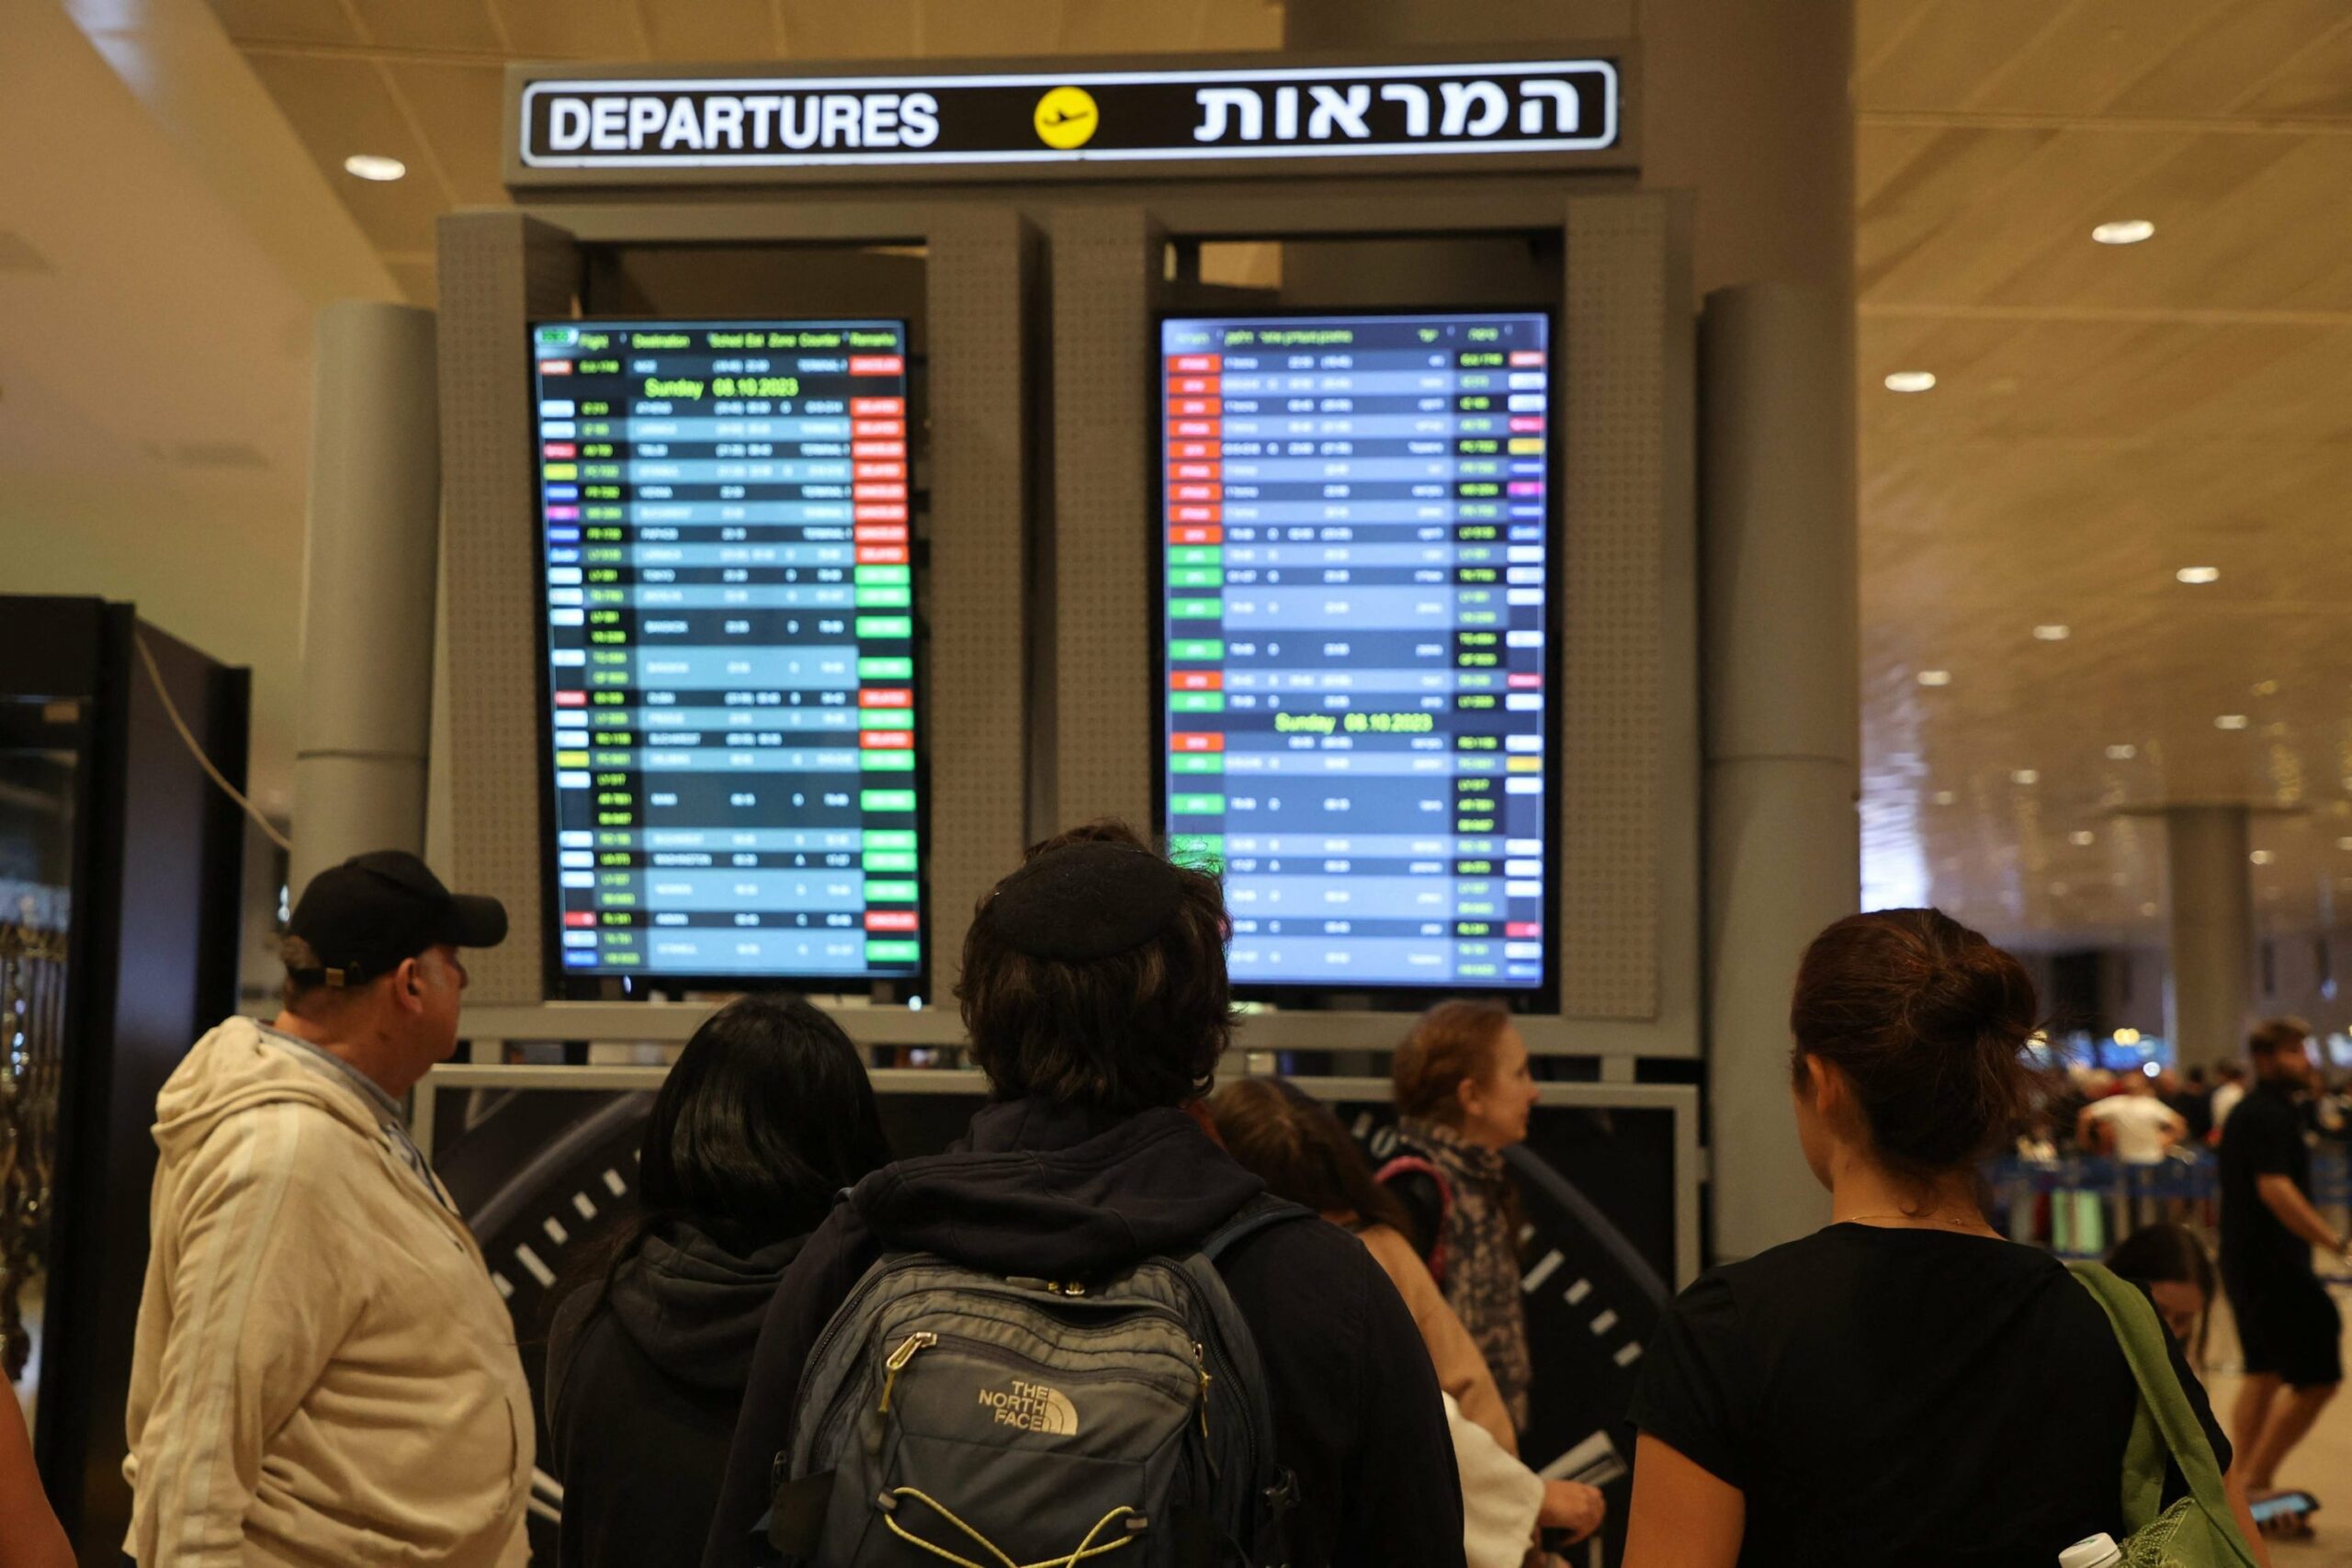 350 more applications to return from Israel, additional 72 evacuated to safety